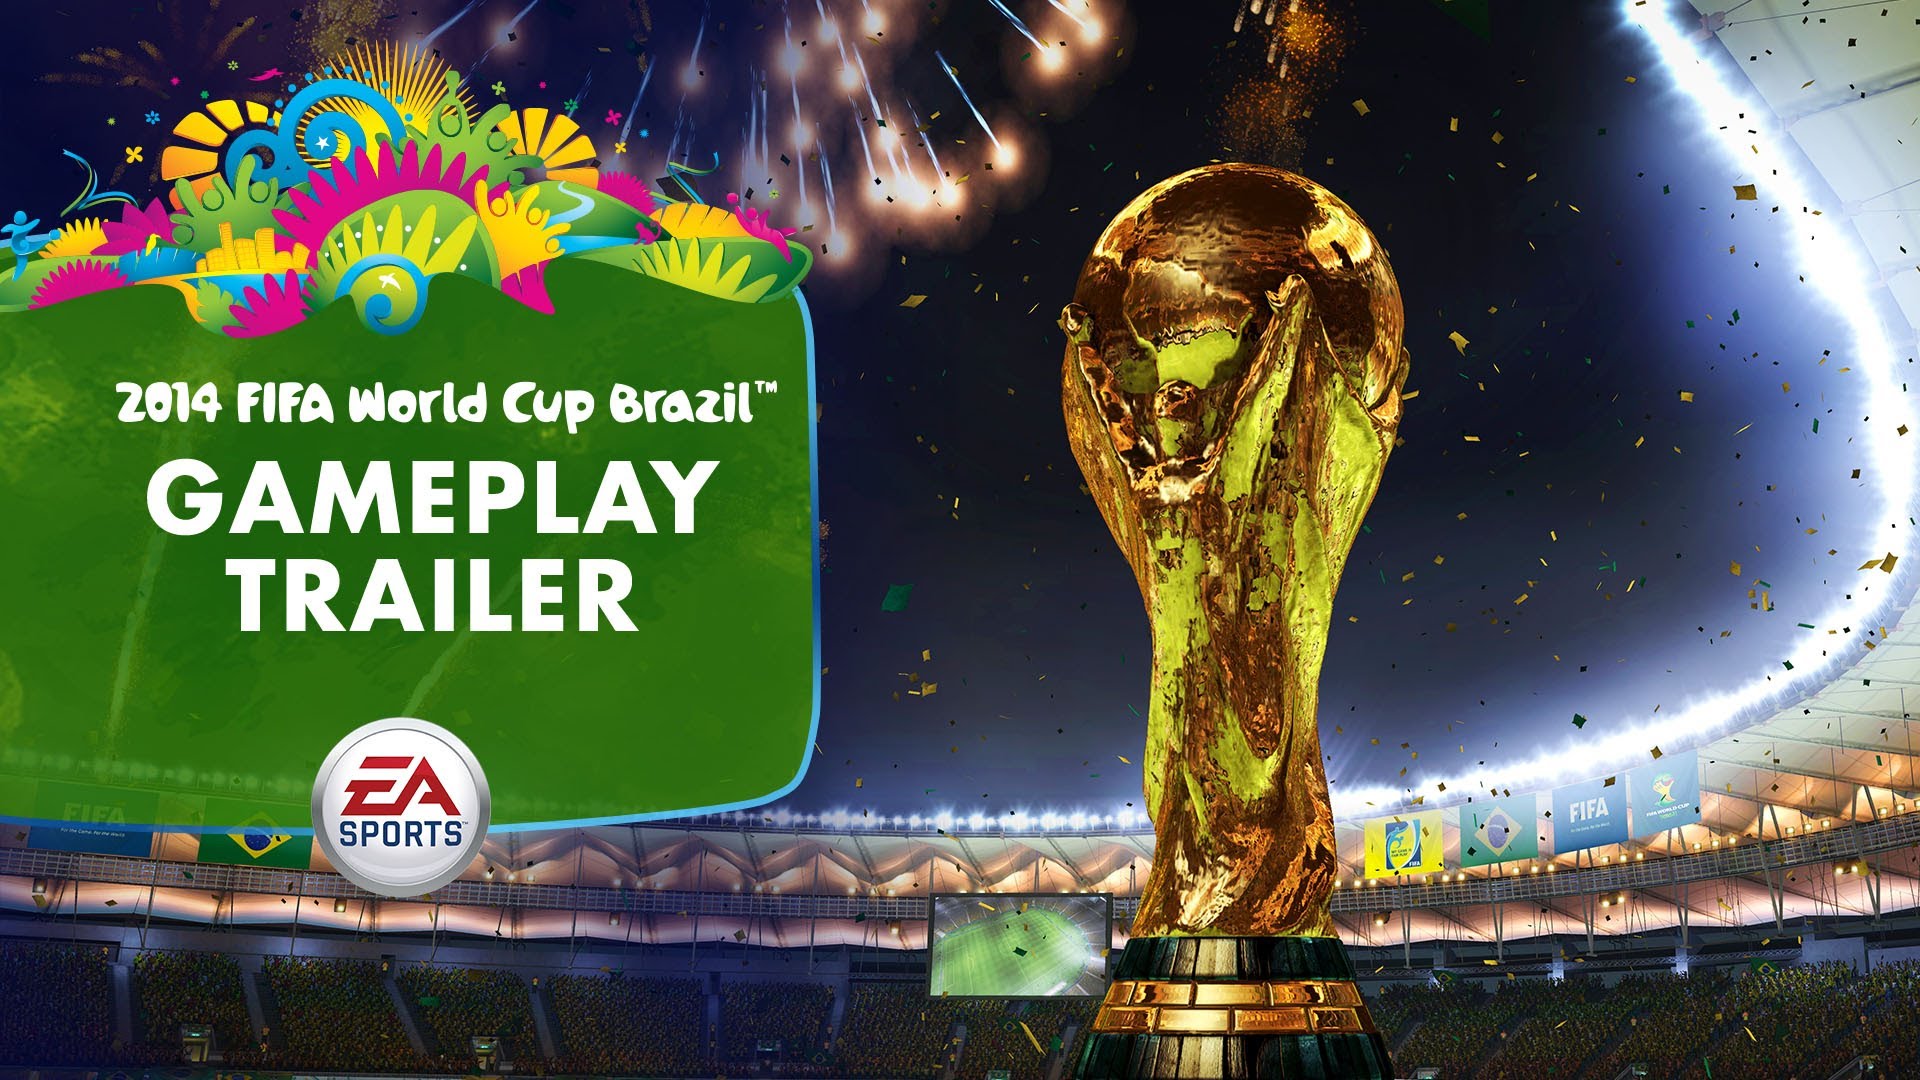 First Game Play Trailer of EA Sports 2014 FIFA World Cup